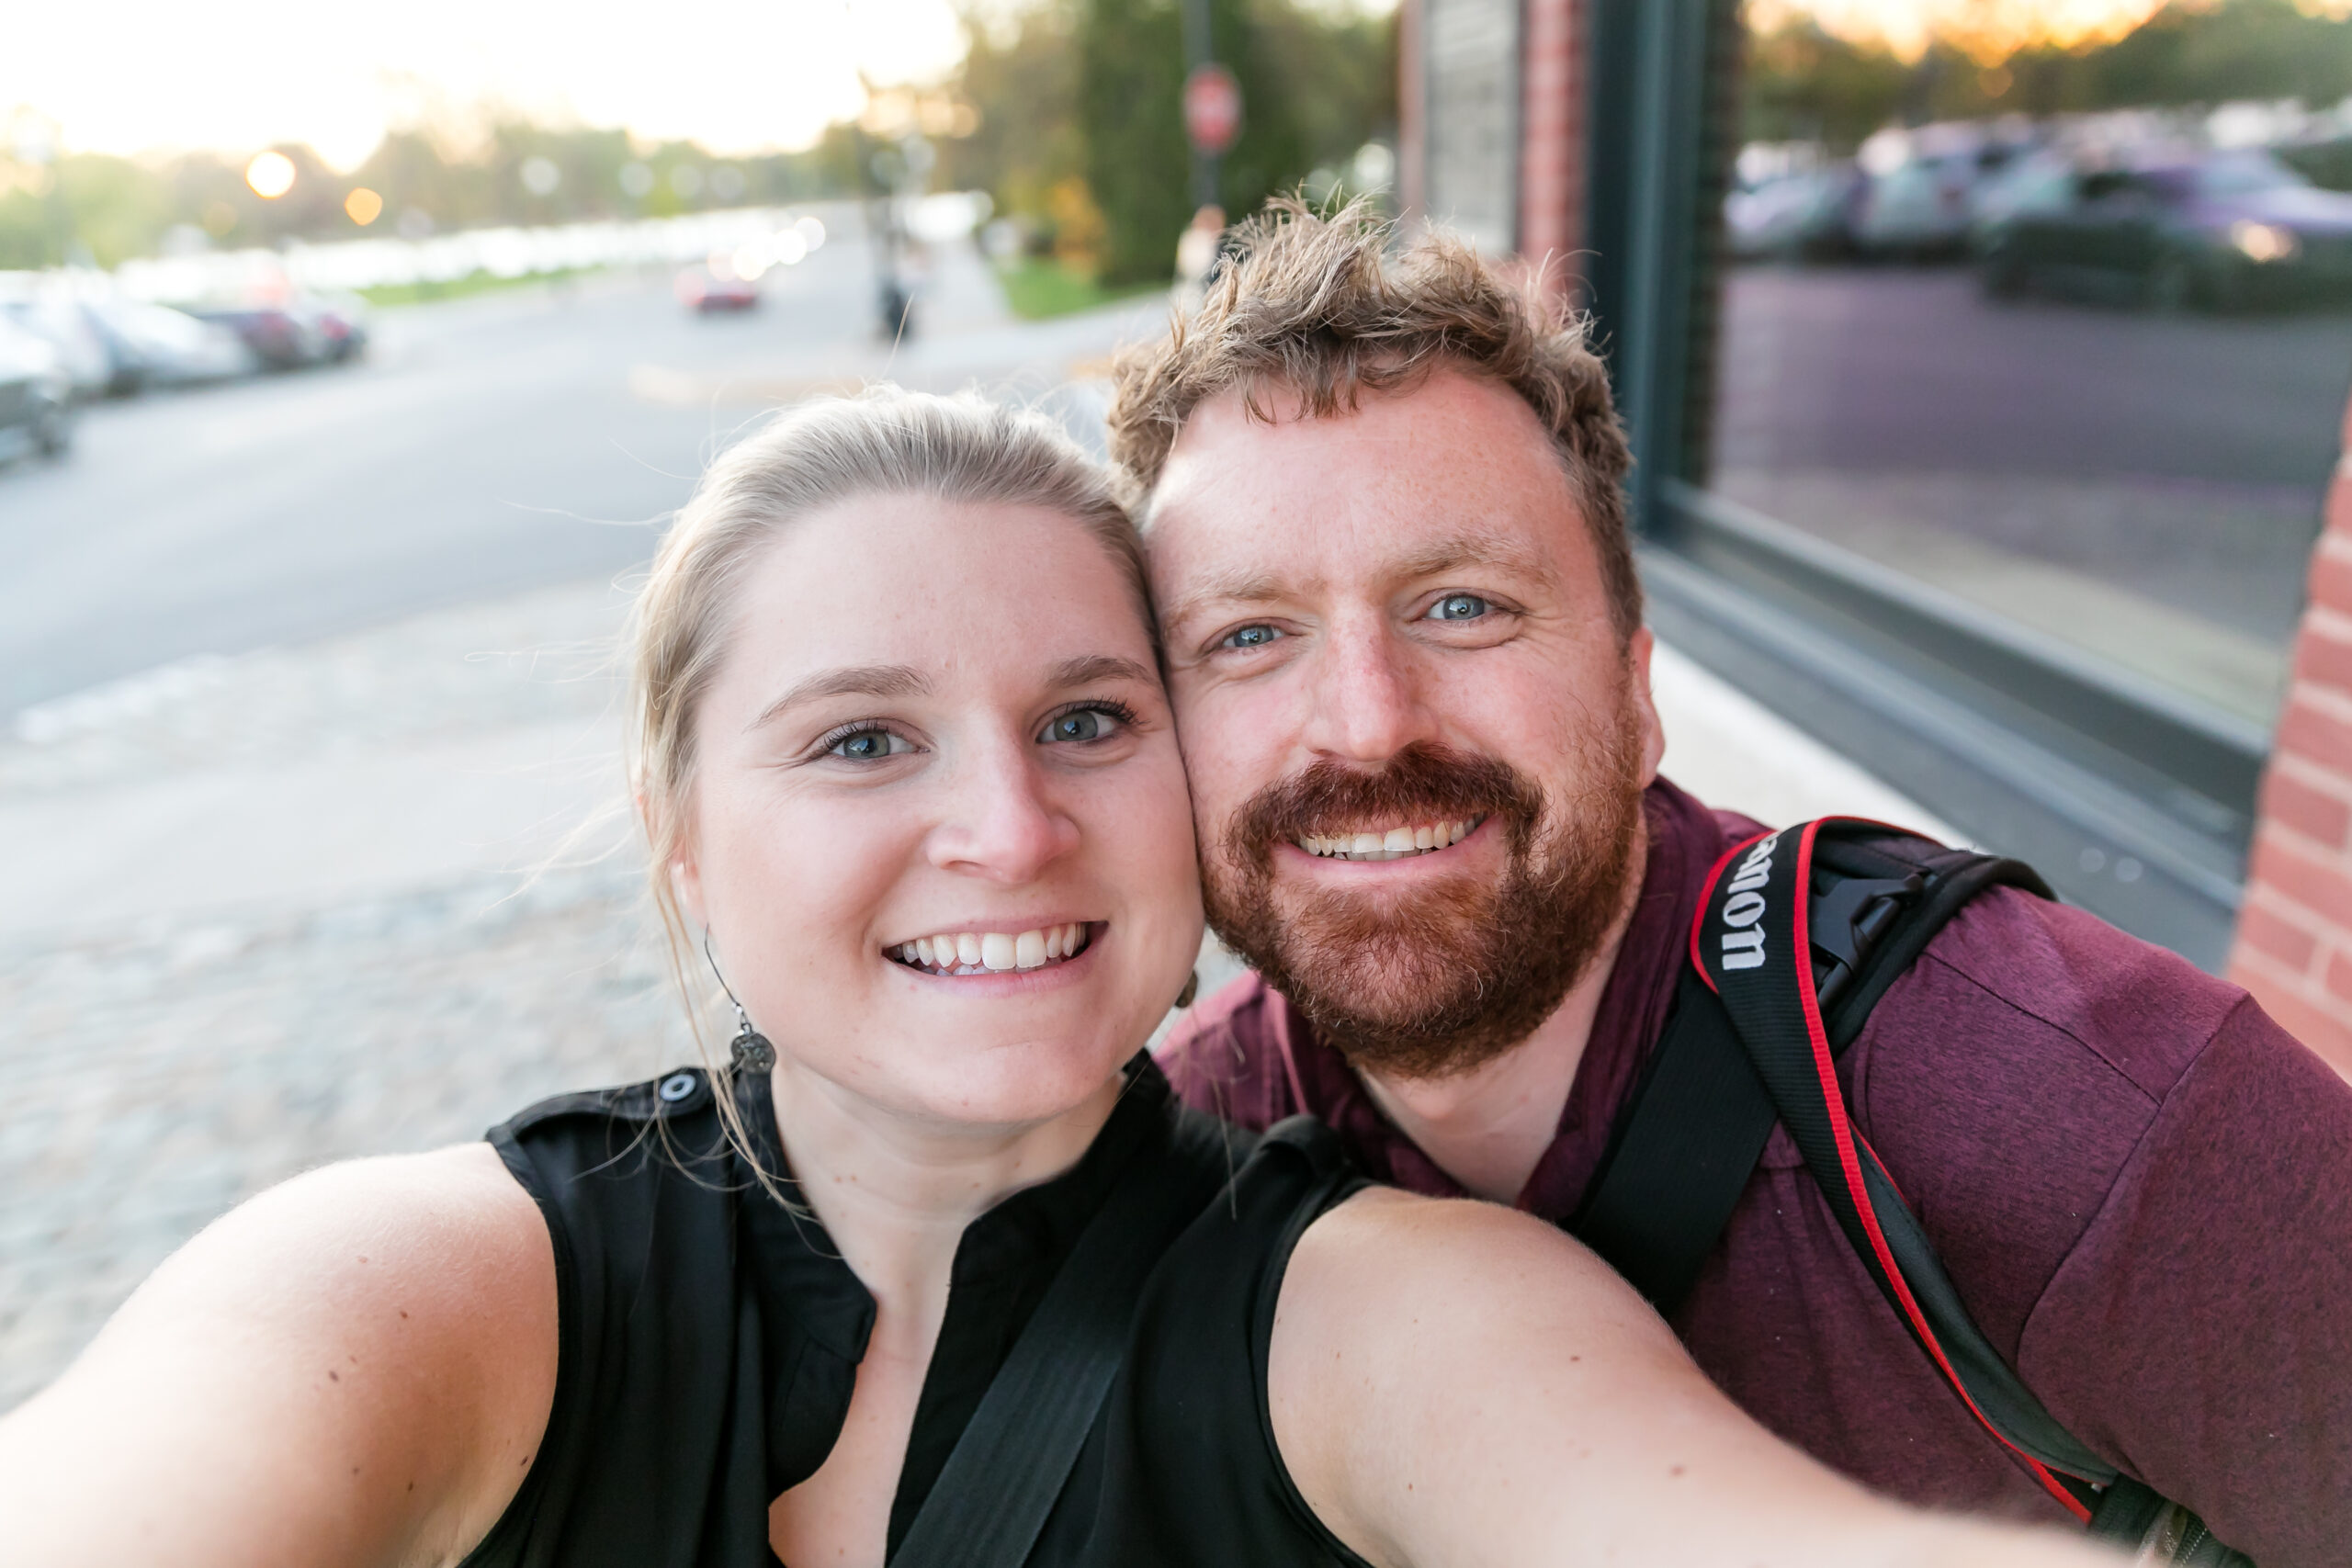 emily jean and ben branson selfie photo at a wedding they photographed in downtown la crosse wi 